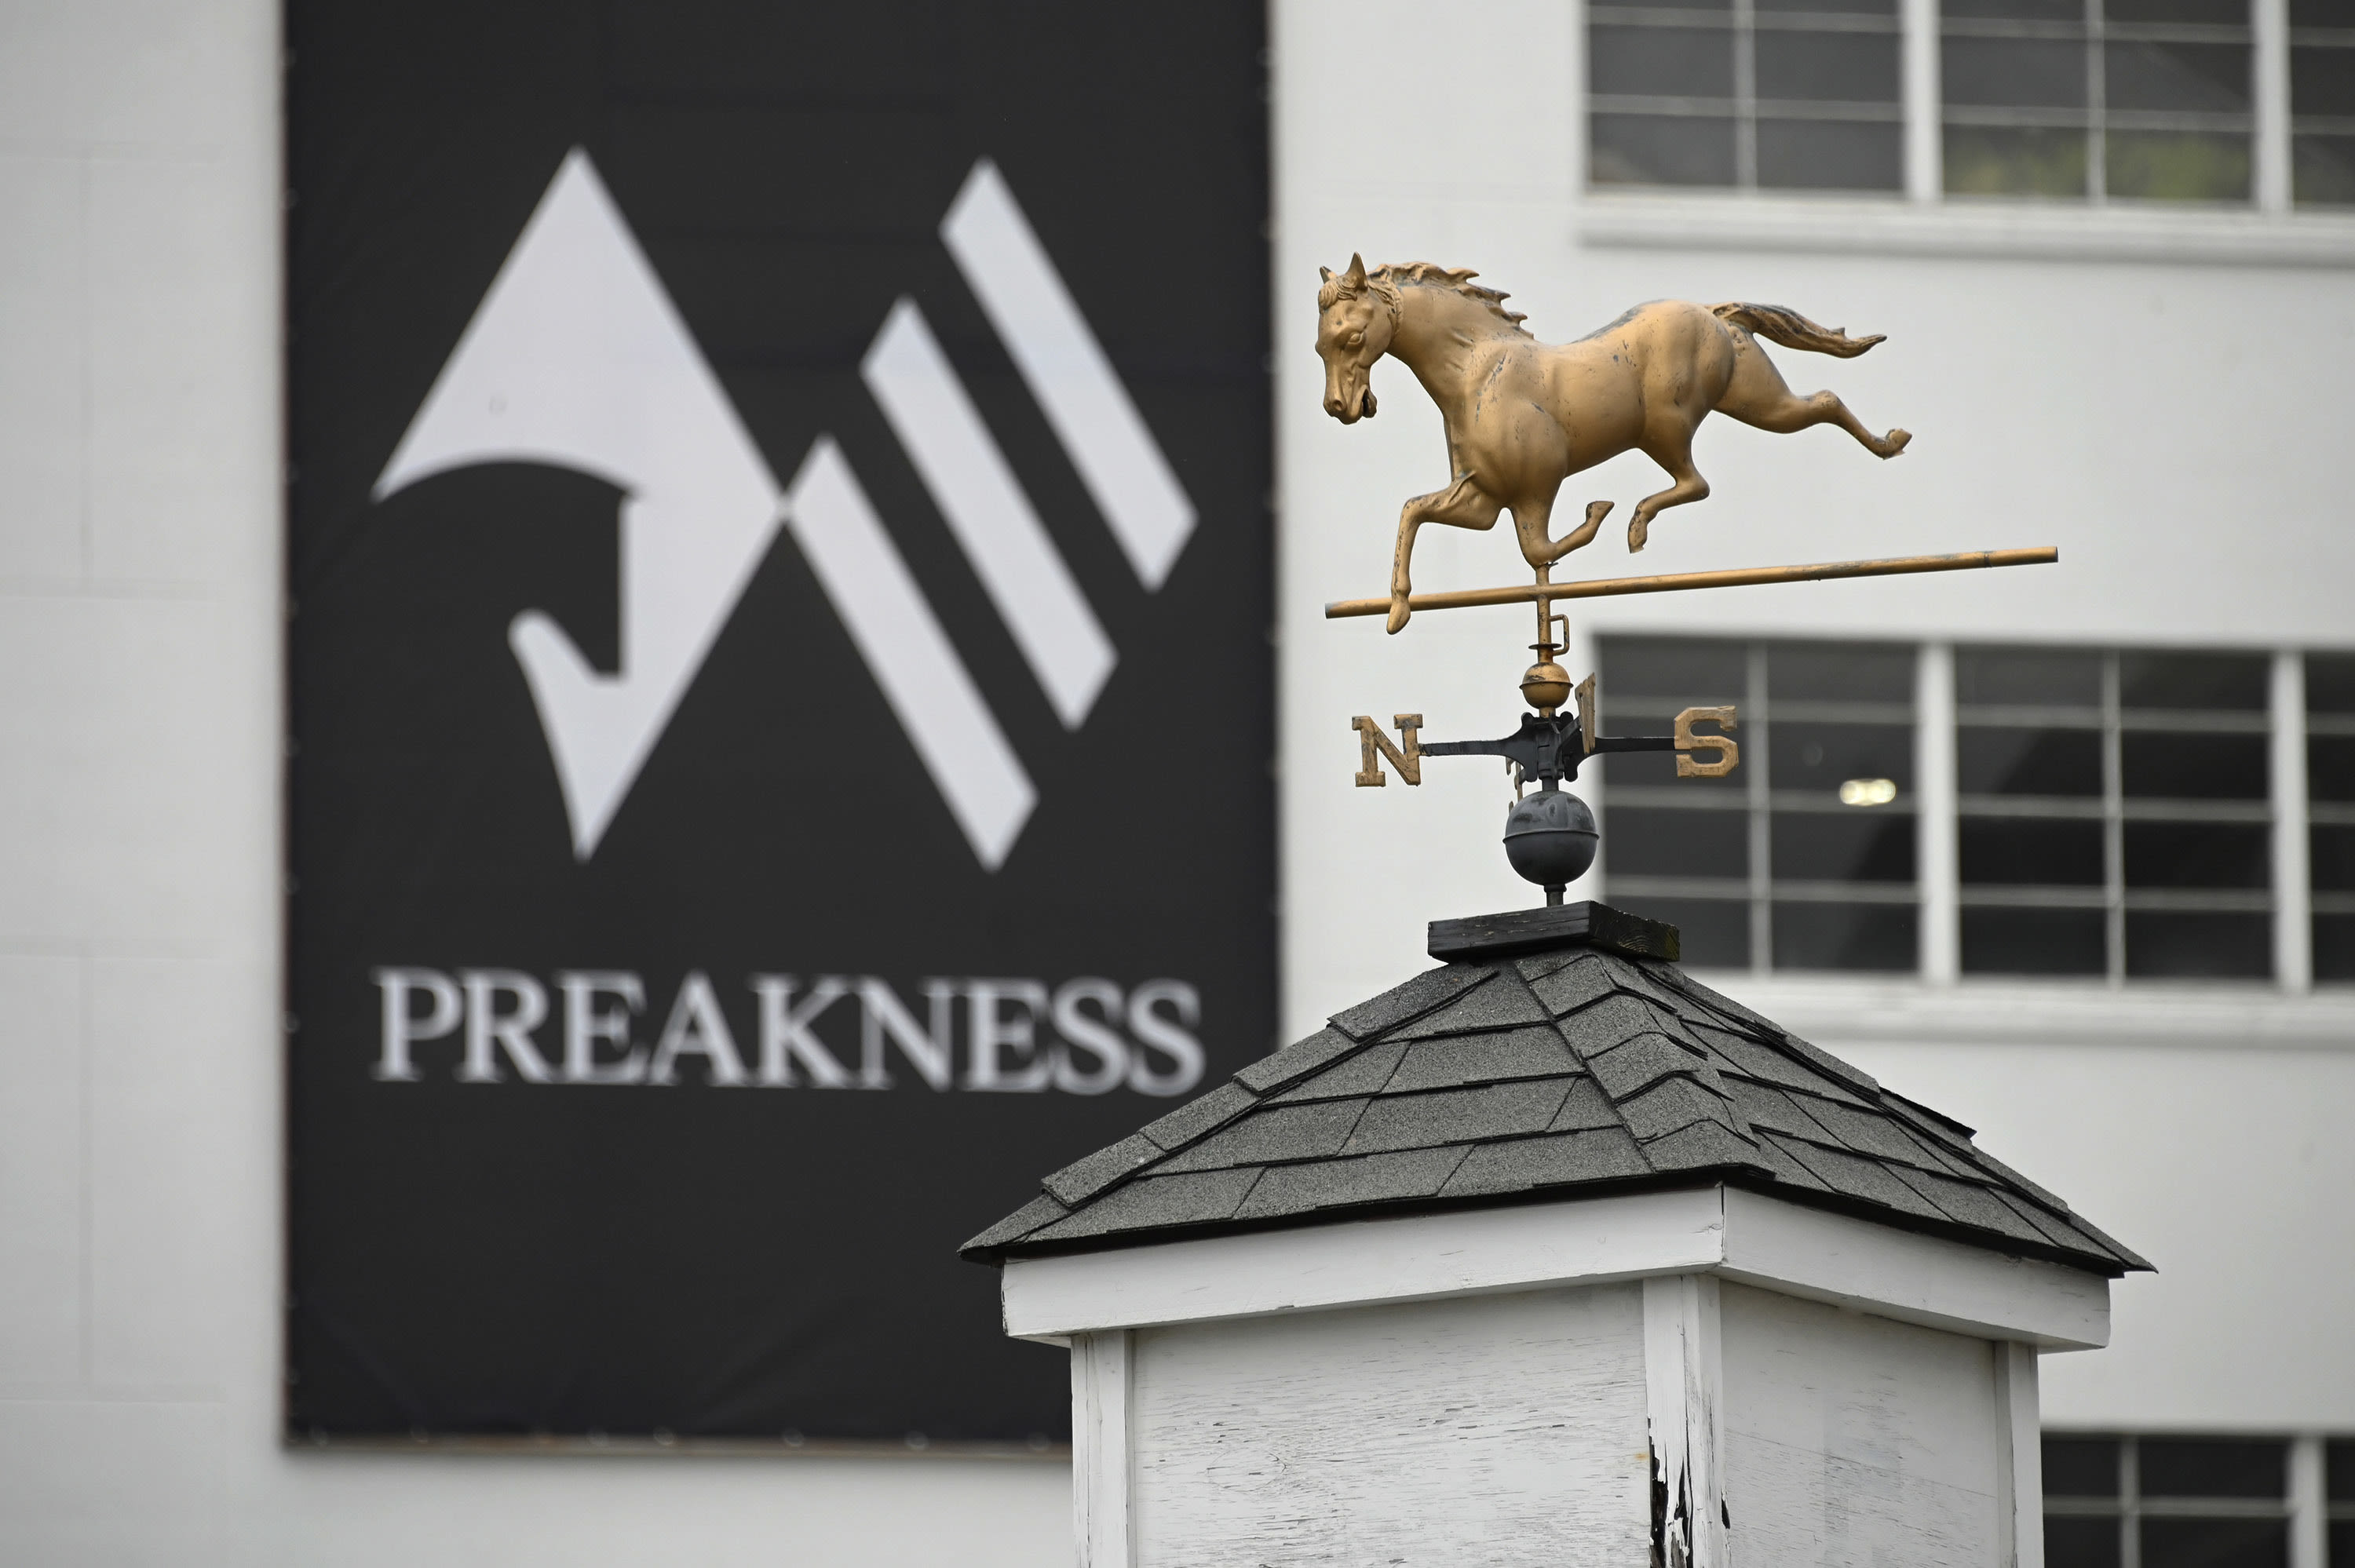 Festival with a ‘series of events’ to promote 150th Preakness Stakes